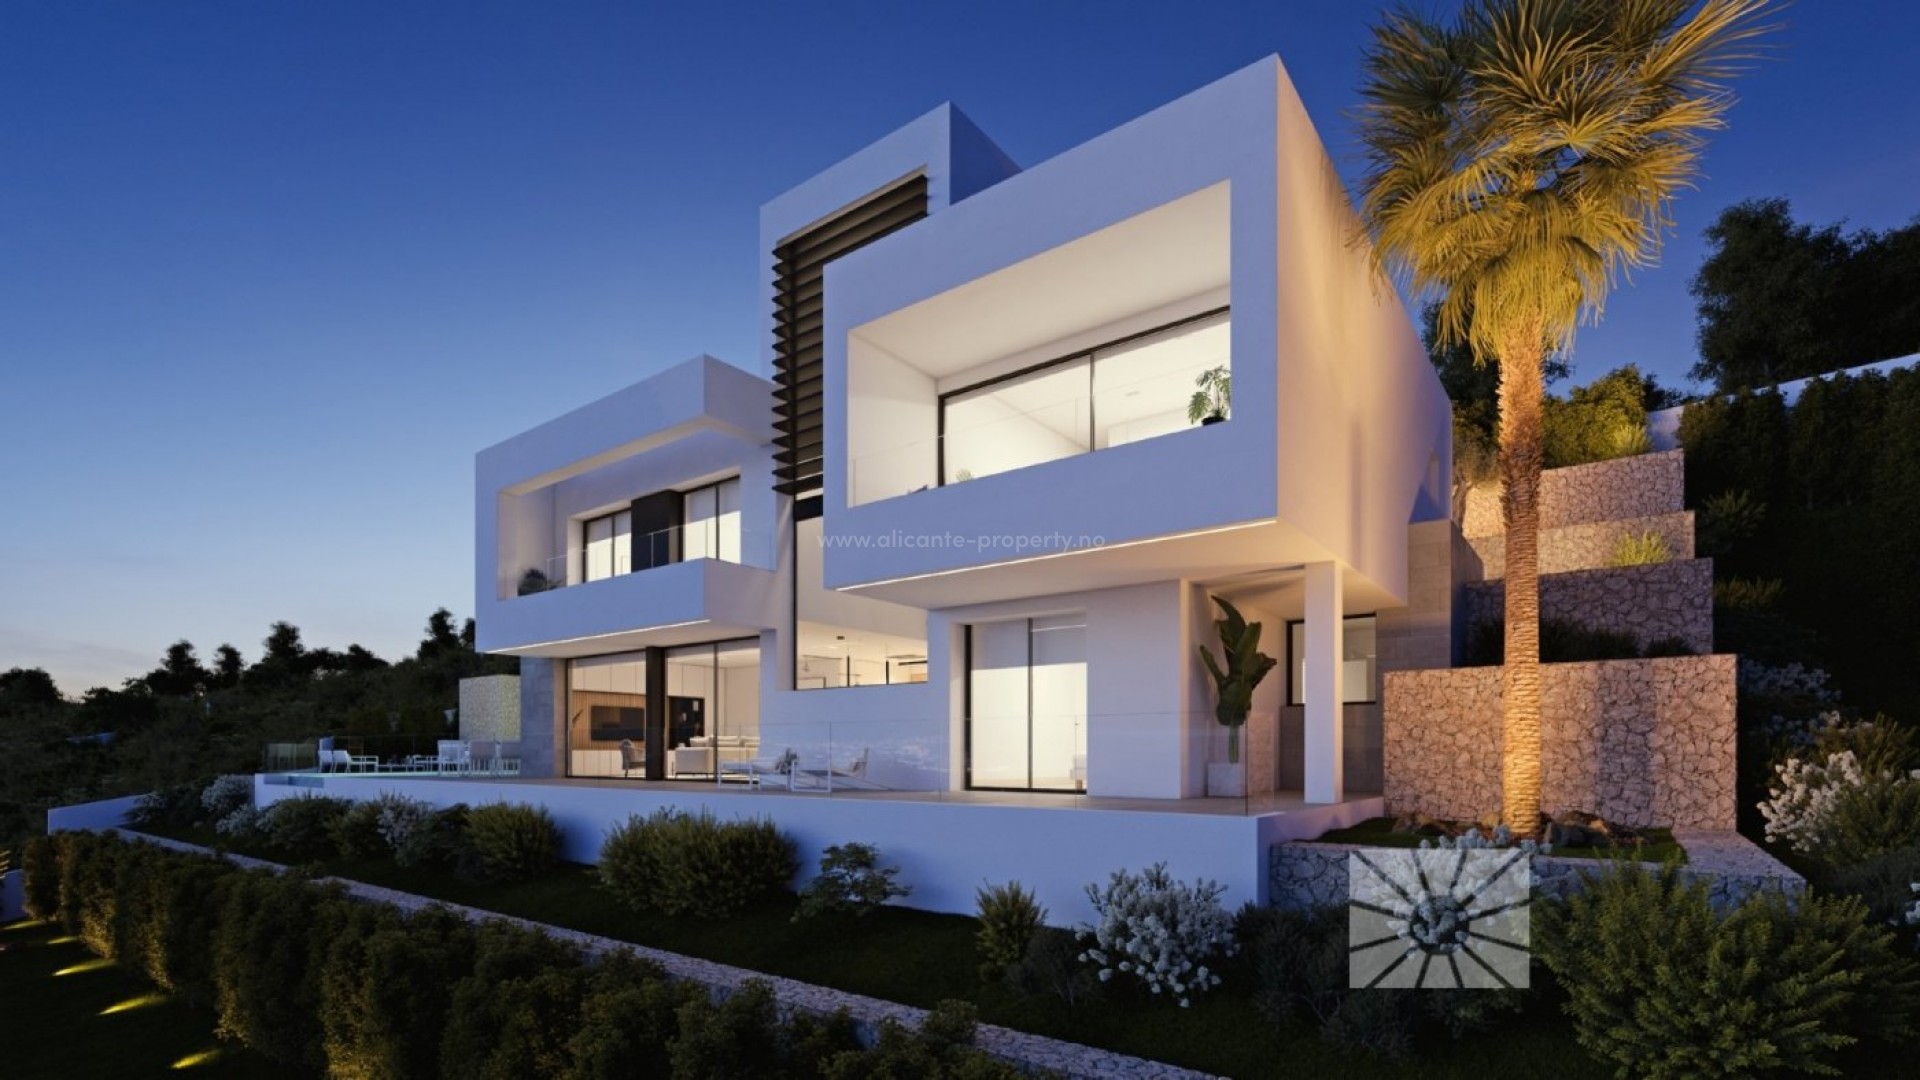 Impressive luxury villa in Sierra de Altea with sea views, 4 bedrooms, 6 bathrooms, with large swimming pool, terraces and veranda. The villa is equipped with a lift.